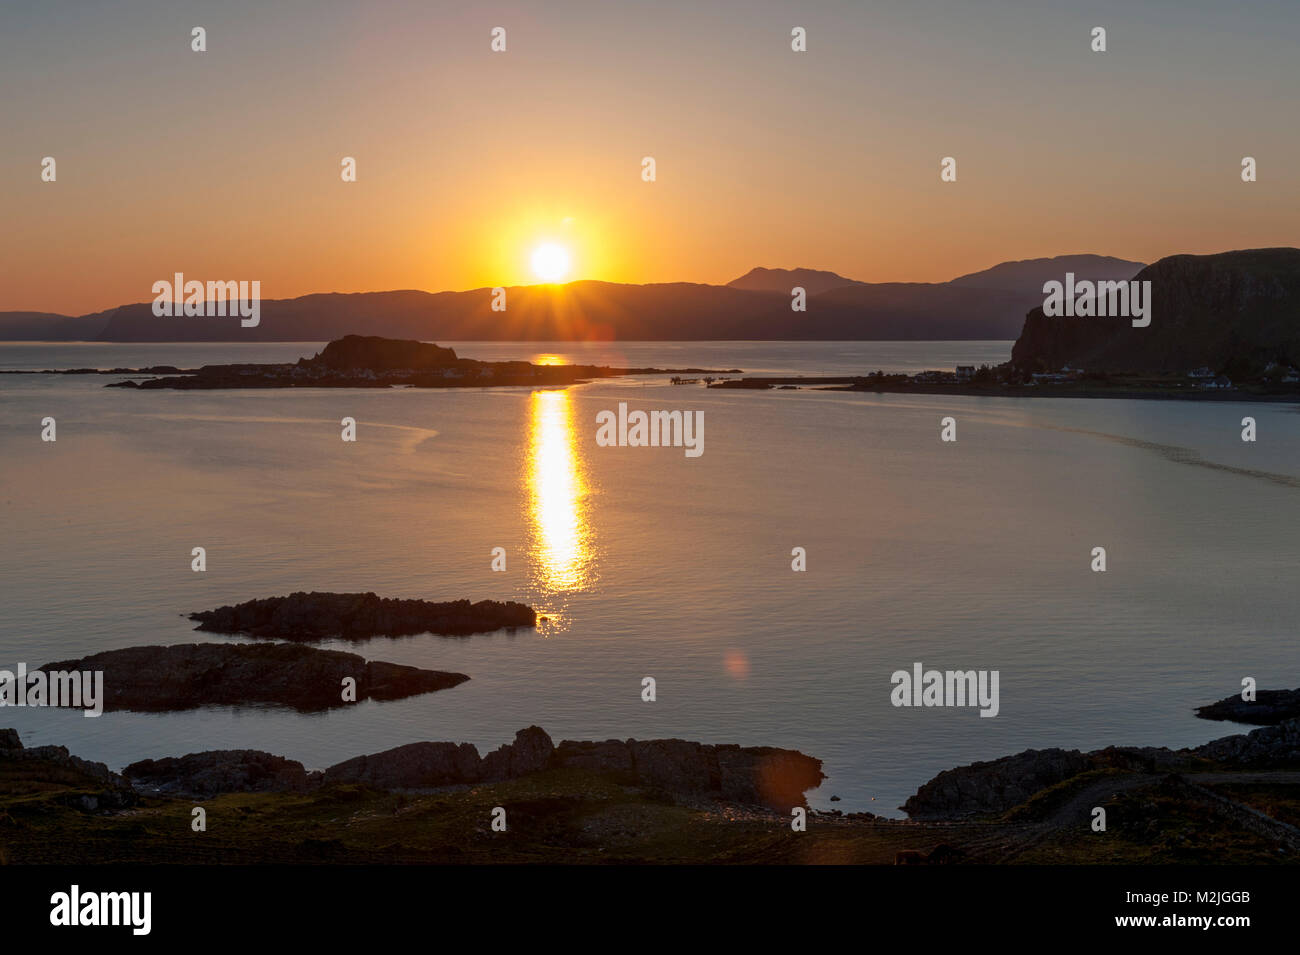 Stunning view of village of Easdale Island  Ellenabeich   Seil Island, Scotland, as the sun sets behind Isle of Mull accross the water  Stock Photo